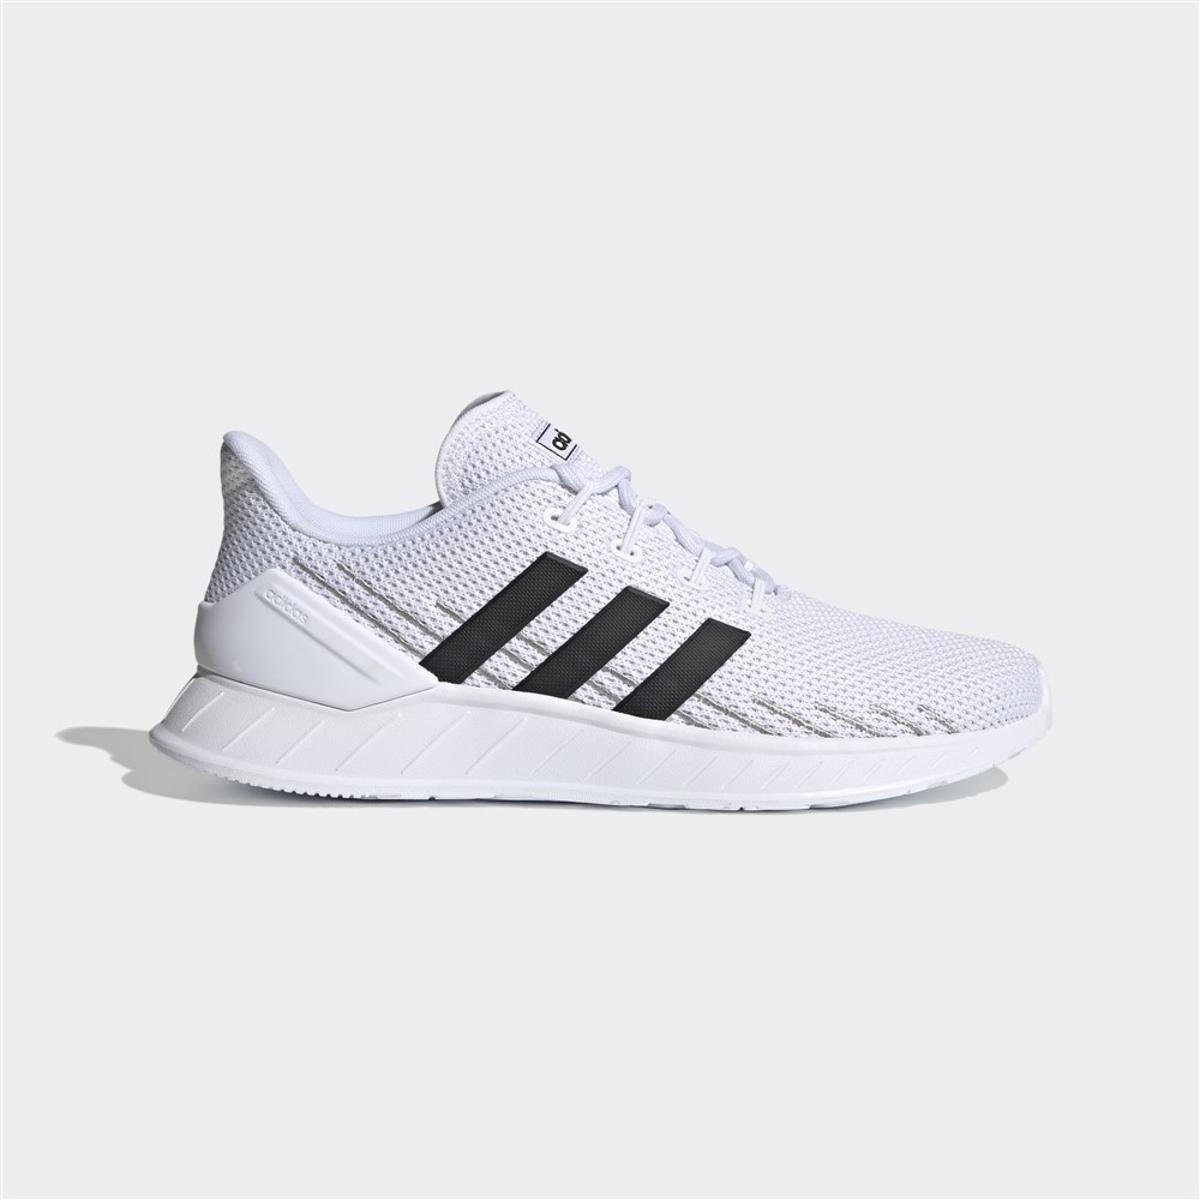 Bugt Pointer Sige Buy Adidas Products at Best Price in Pakistan - (May, 2023) - Daraz.pk